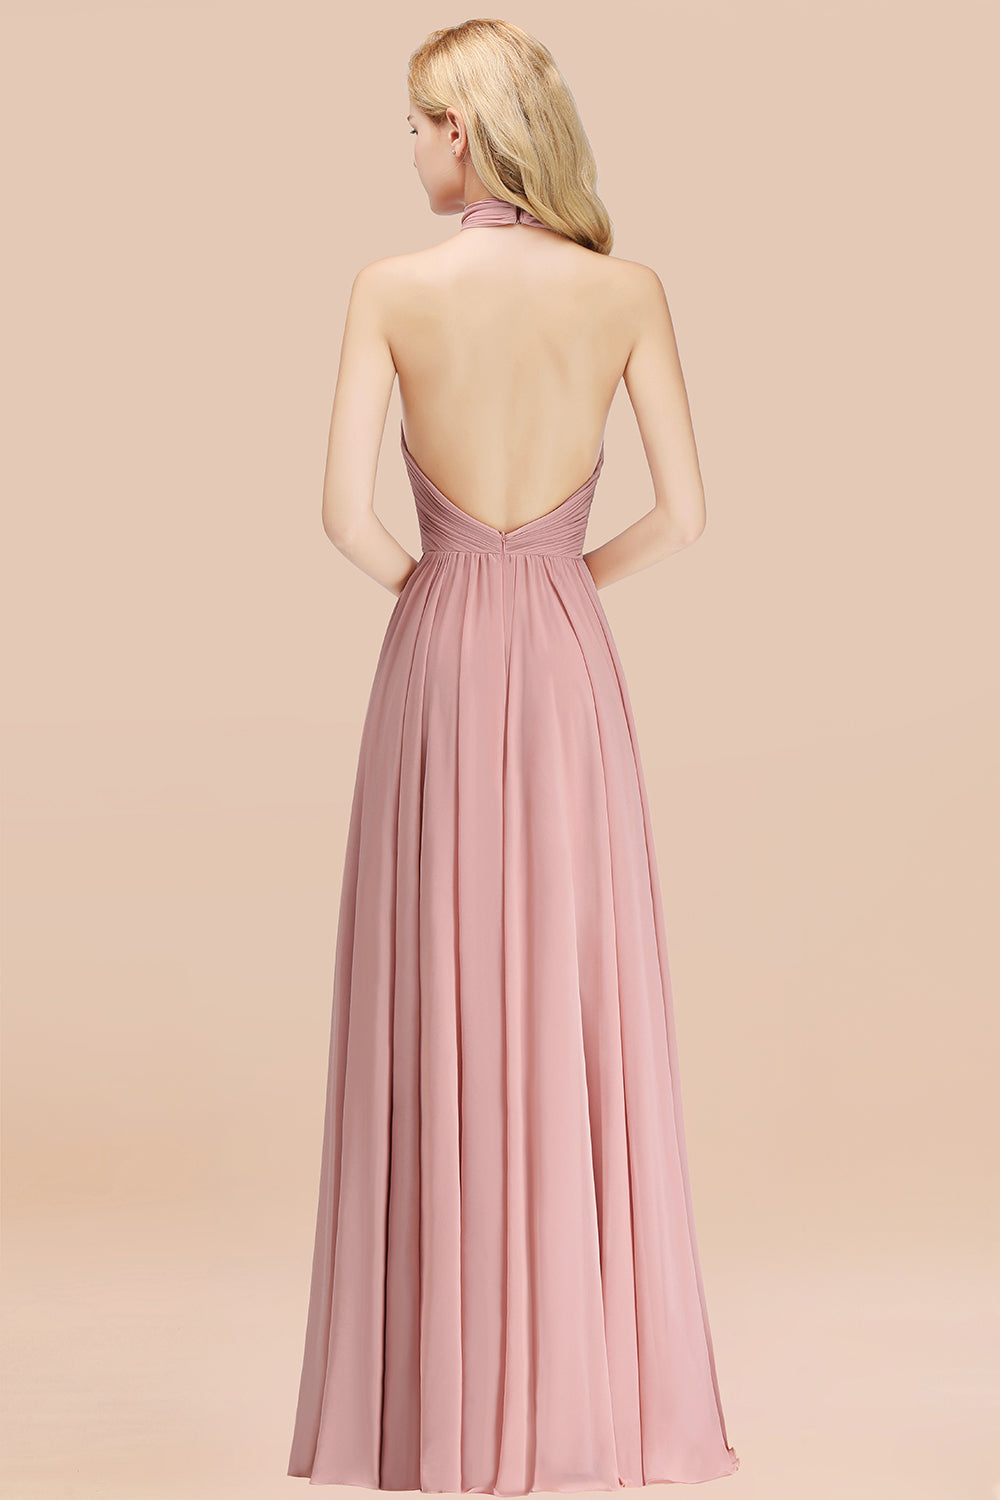 Load image into Gallery viewer, Gorgeous High-Neck Halter Backless Bridesmaid Dress Dusty Rose Chiffon Maid of Honor Dress-27dress
